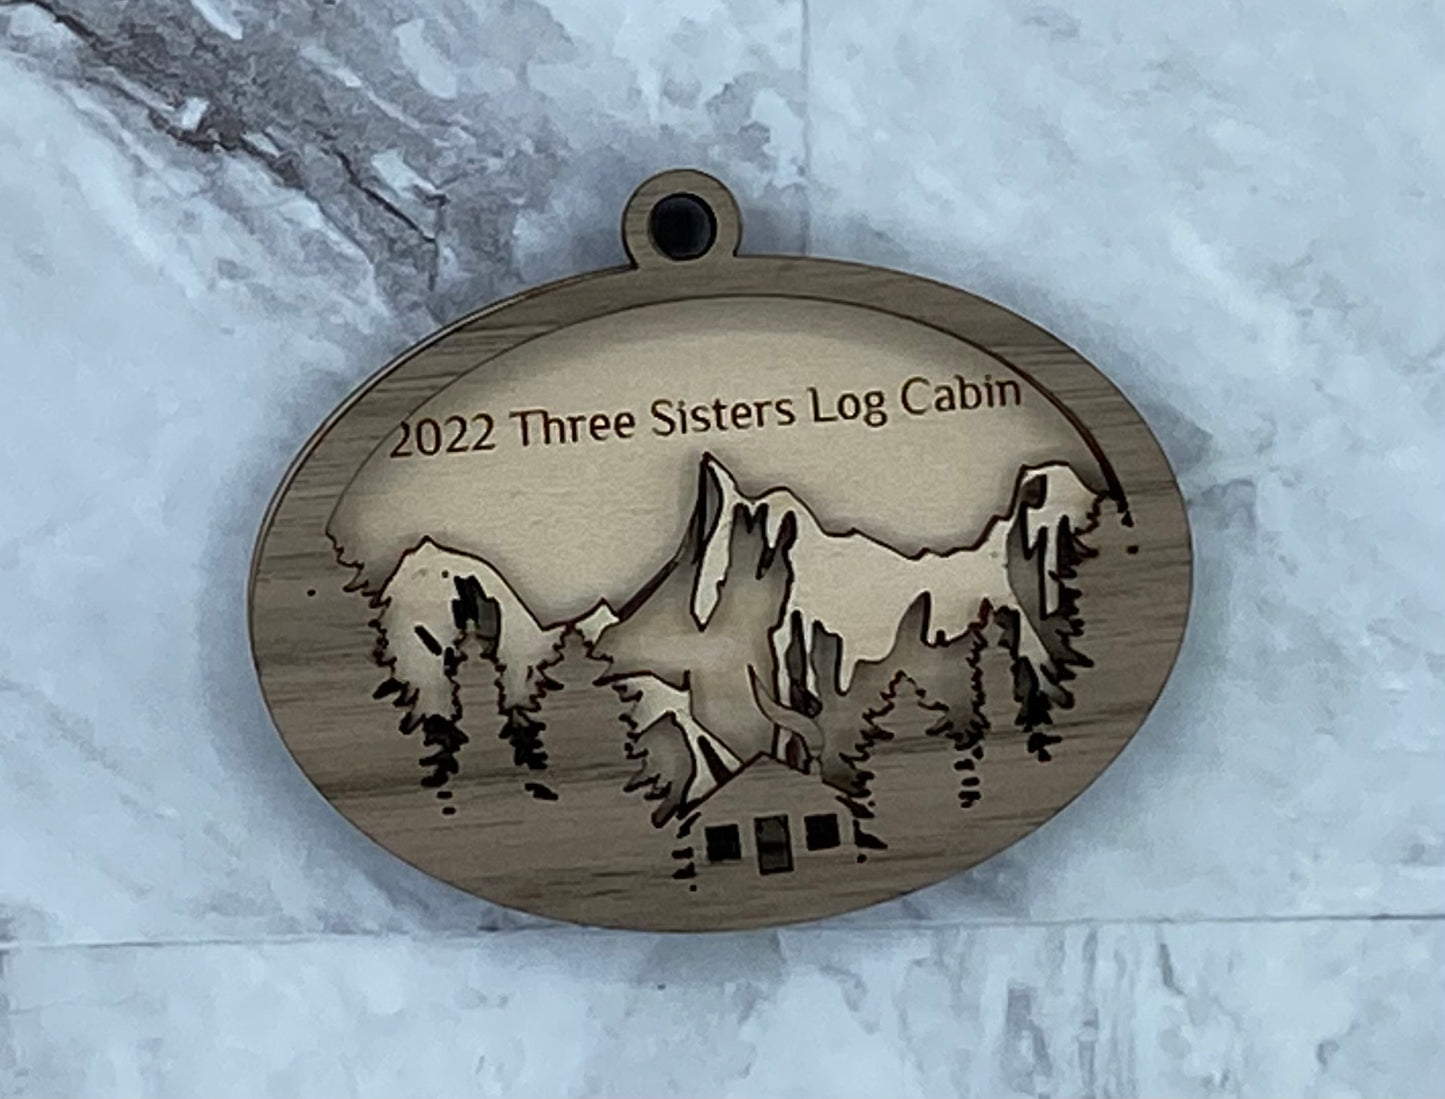 Customized Branded Airbnb VRBO STR Host Items Cabin in the Woods and Mountains ornament